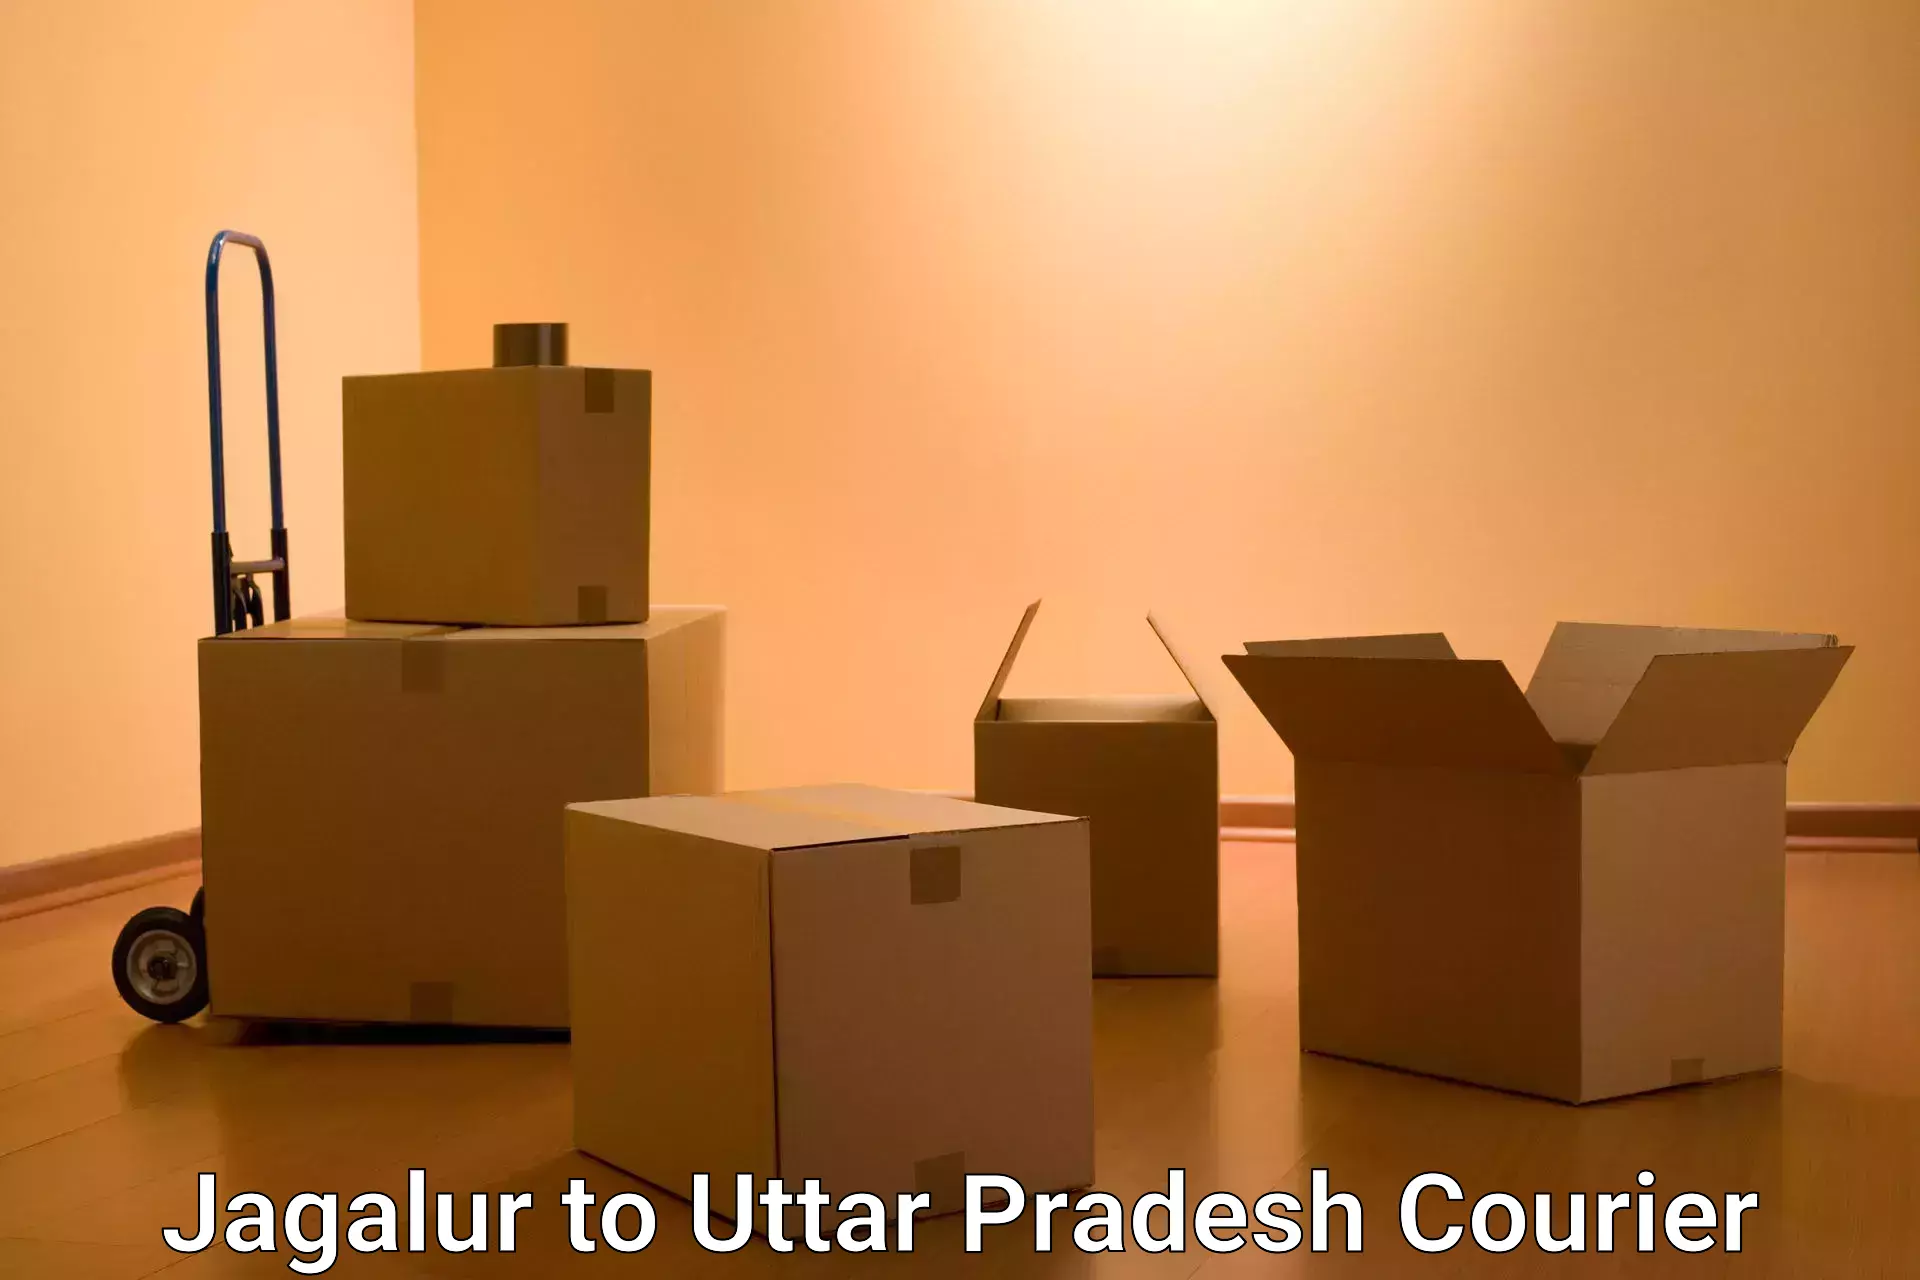 On-demand delivery Jagalur to Aligarh